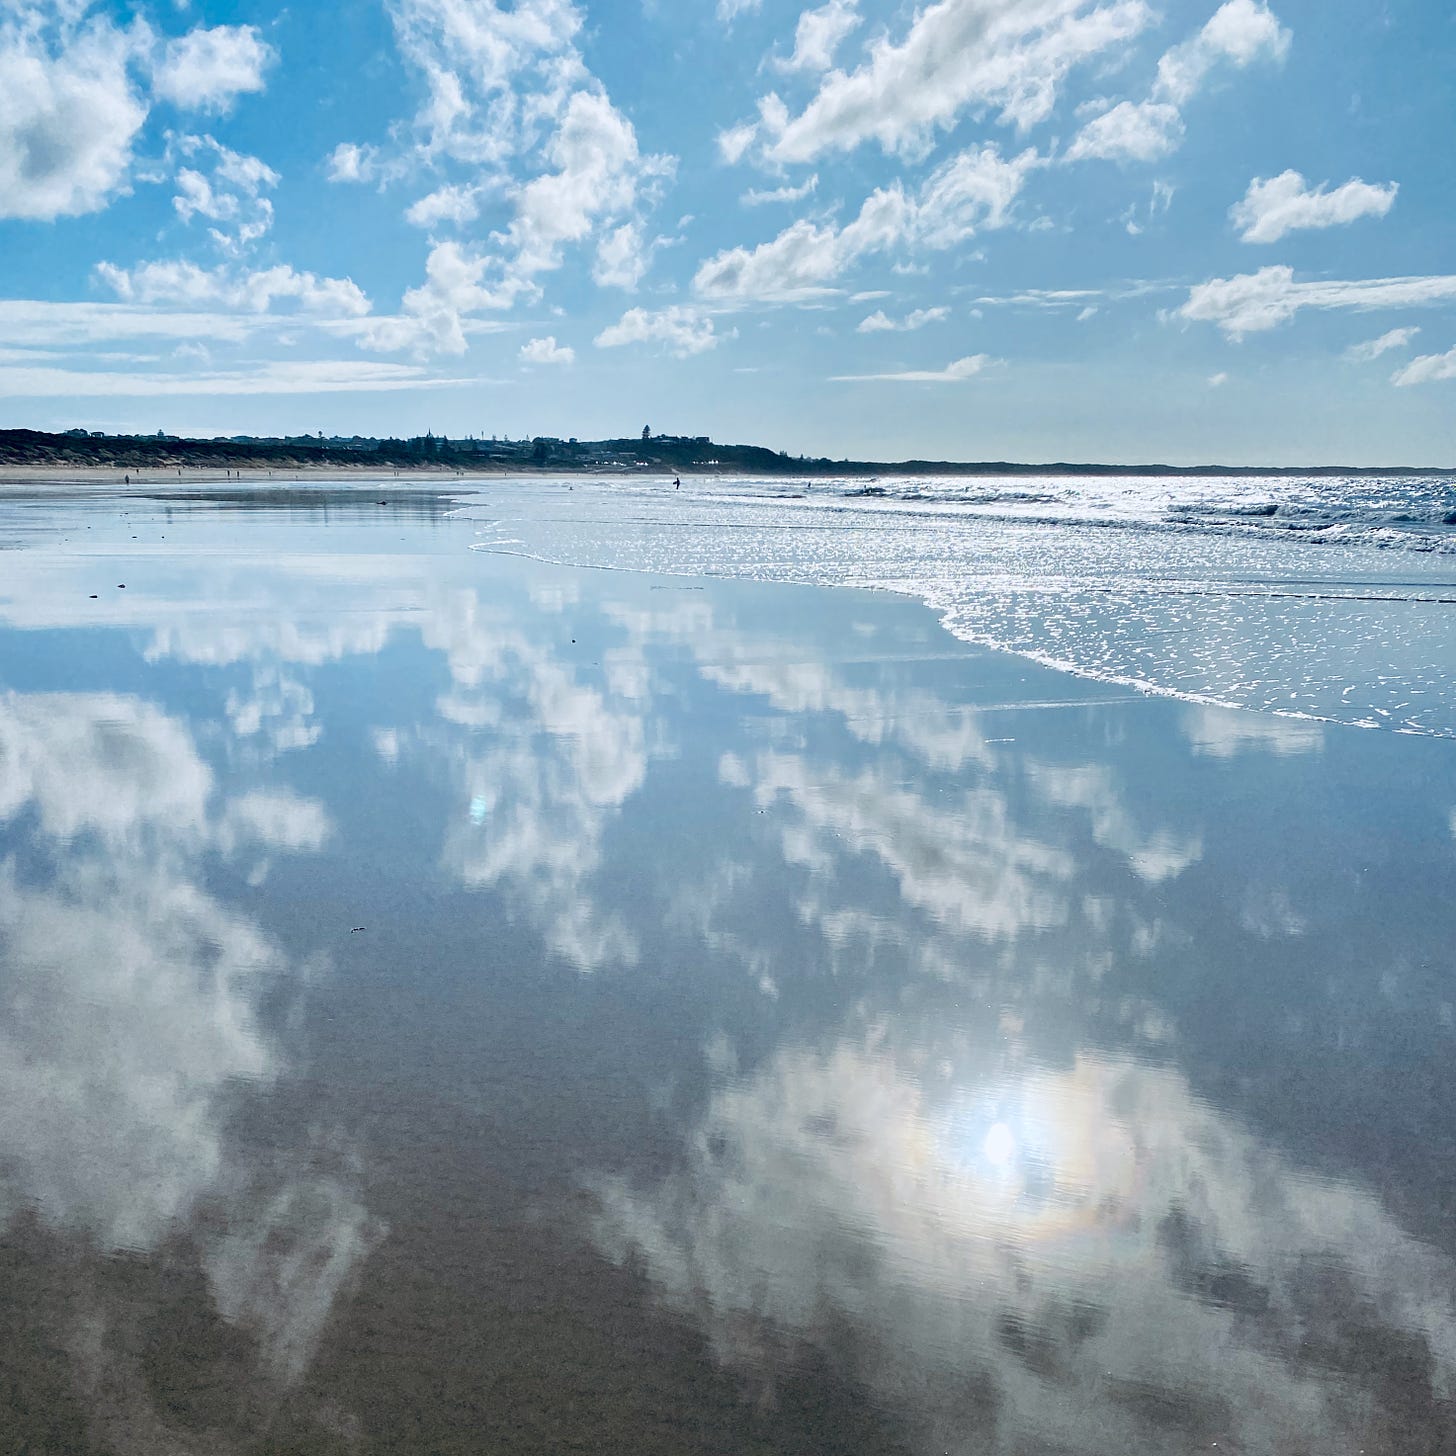 Ocean Grove beach: wide angle; blue sky and clouds reflected in the shallow water, surf to the right; tiny figures in the distance